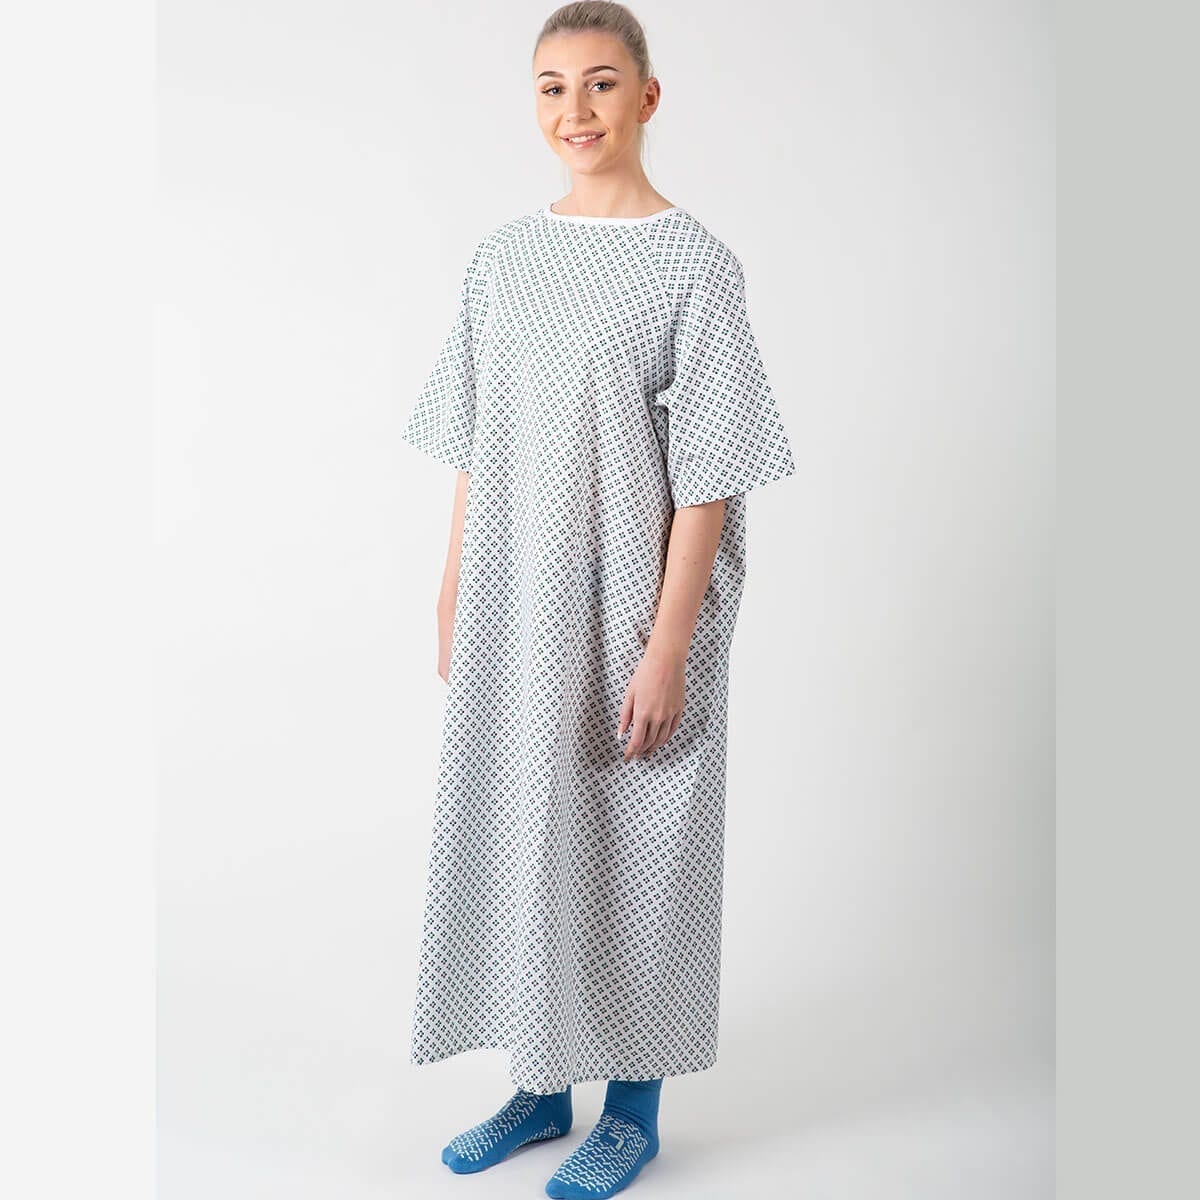 Hospital pullover gown - front view